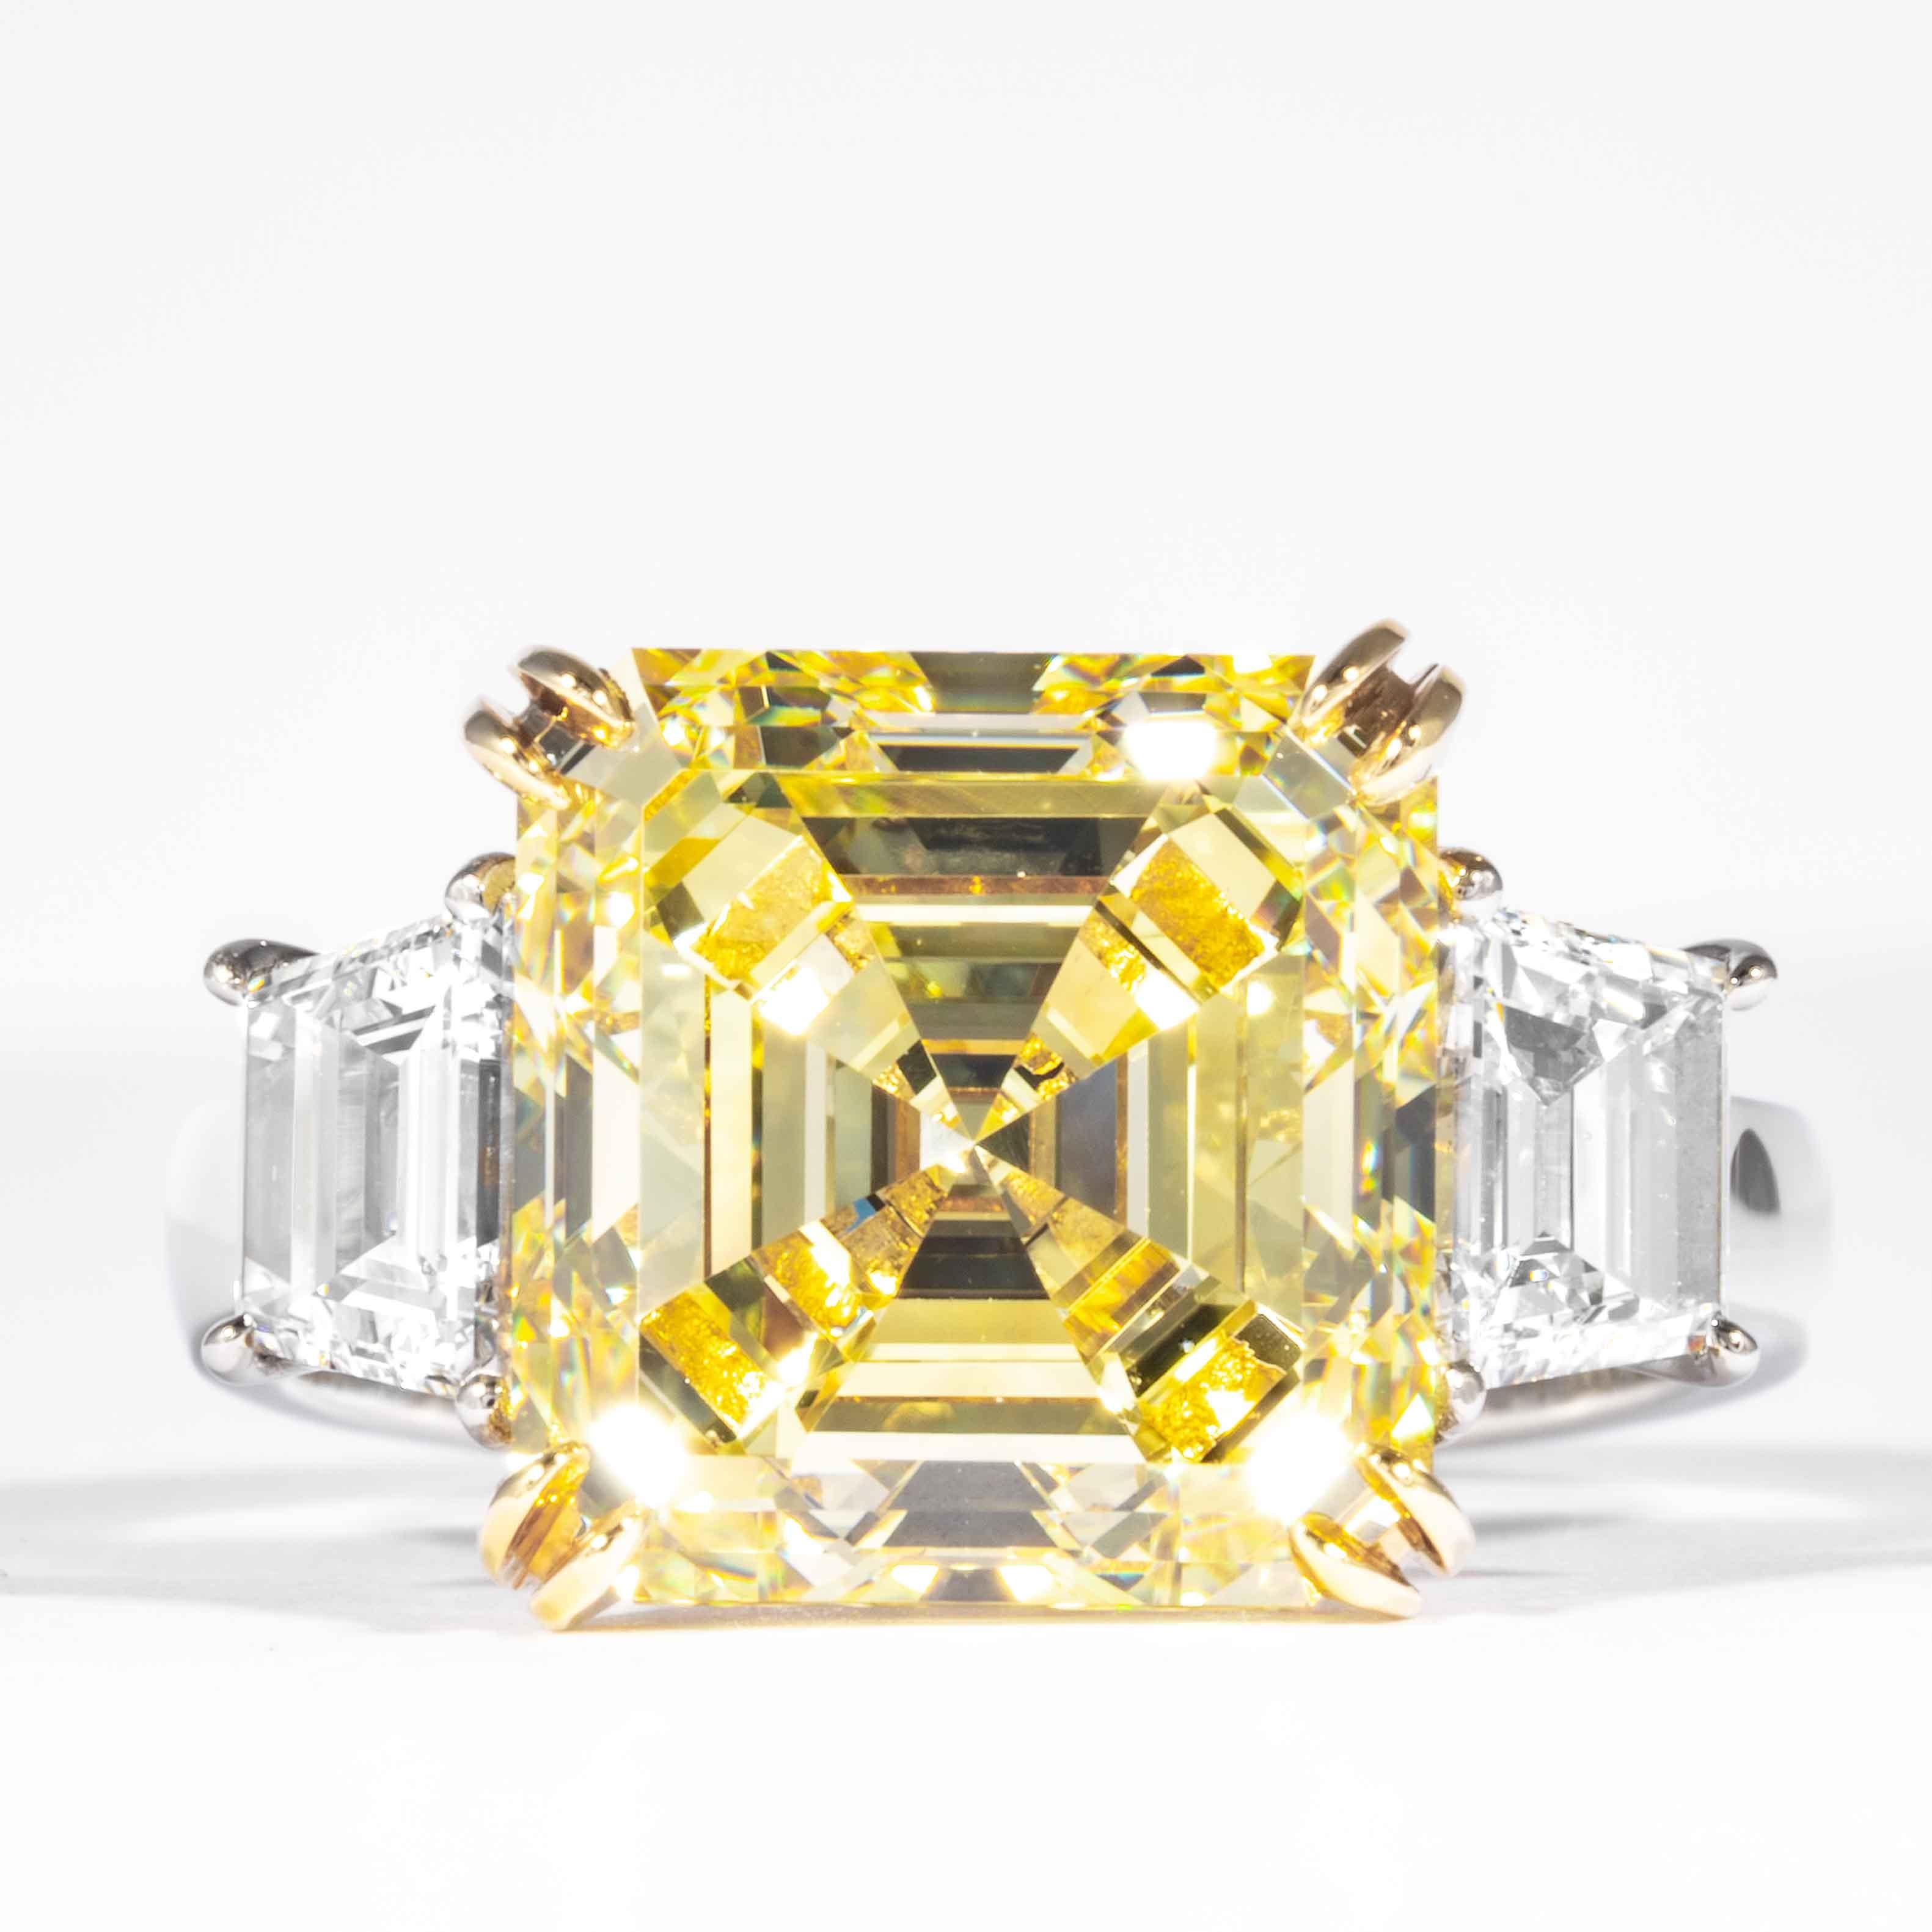 This fancy yellow square emerald cut diamond is offered by Shreve, Crump & Low. This fancy yellow square emerald cut diamond is custom set in a handcrafted Shreve, Crump & Low platinum and 18 karat yellow gold 3 stone ring consisting of 1 square